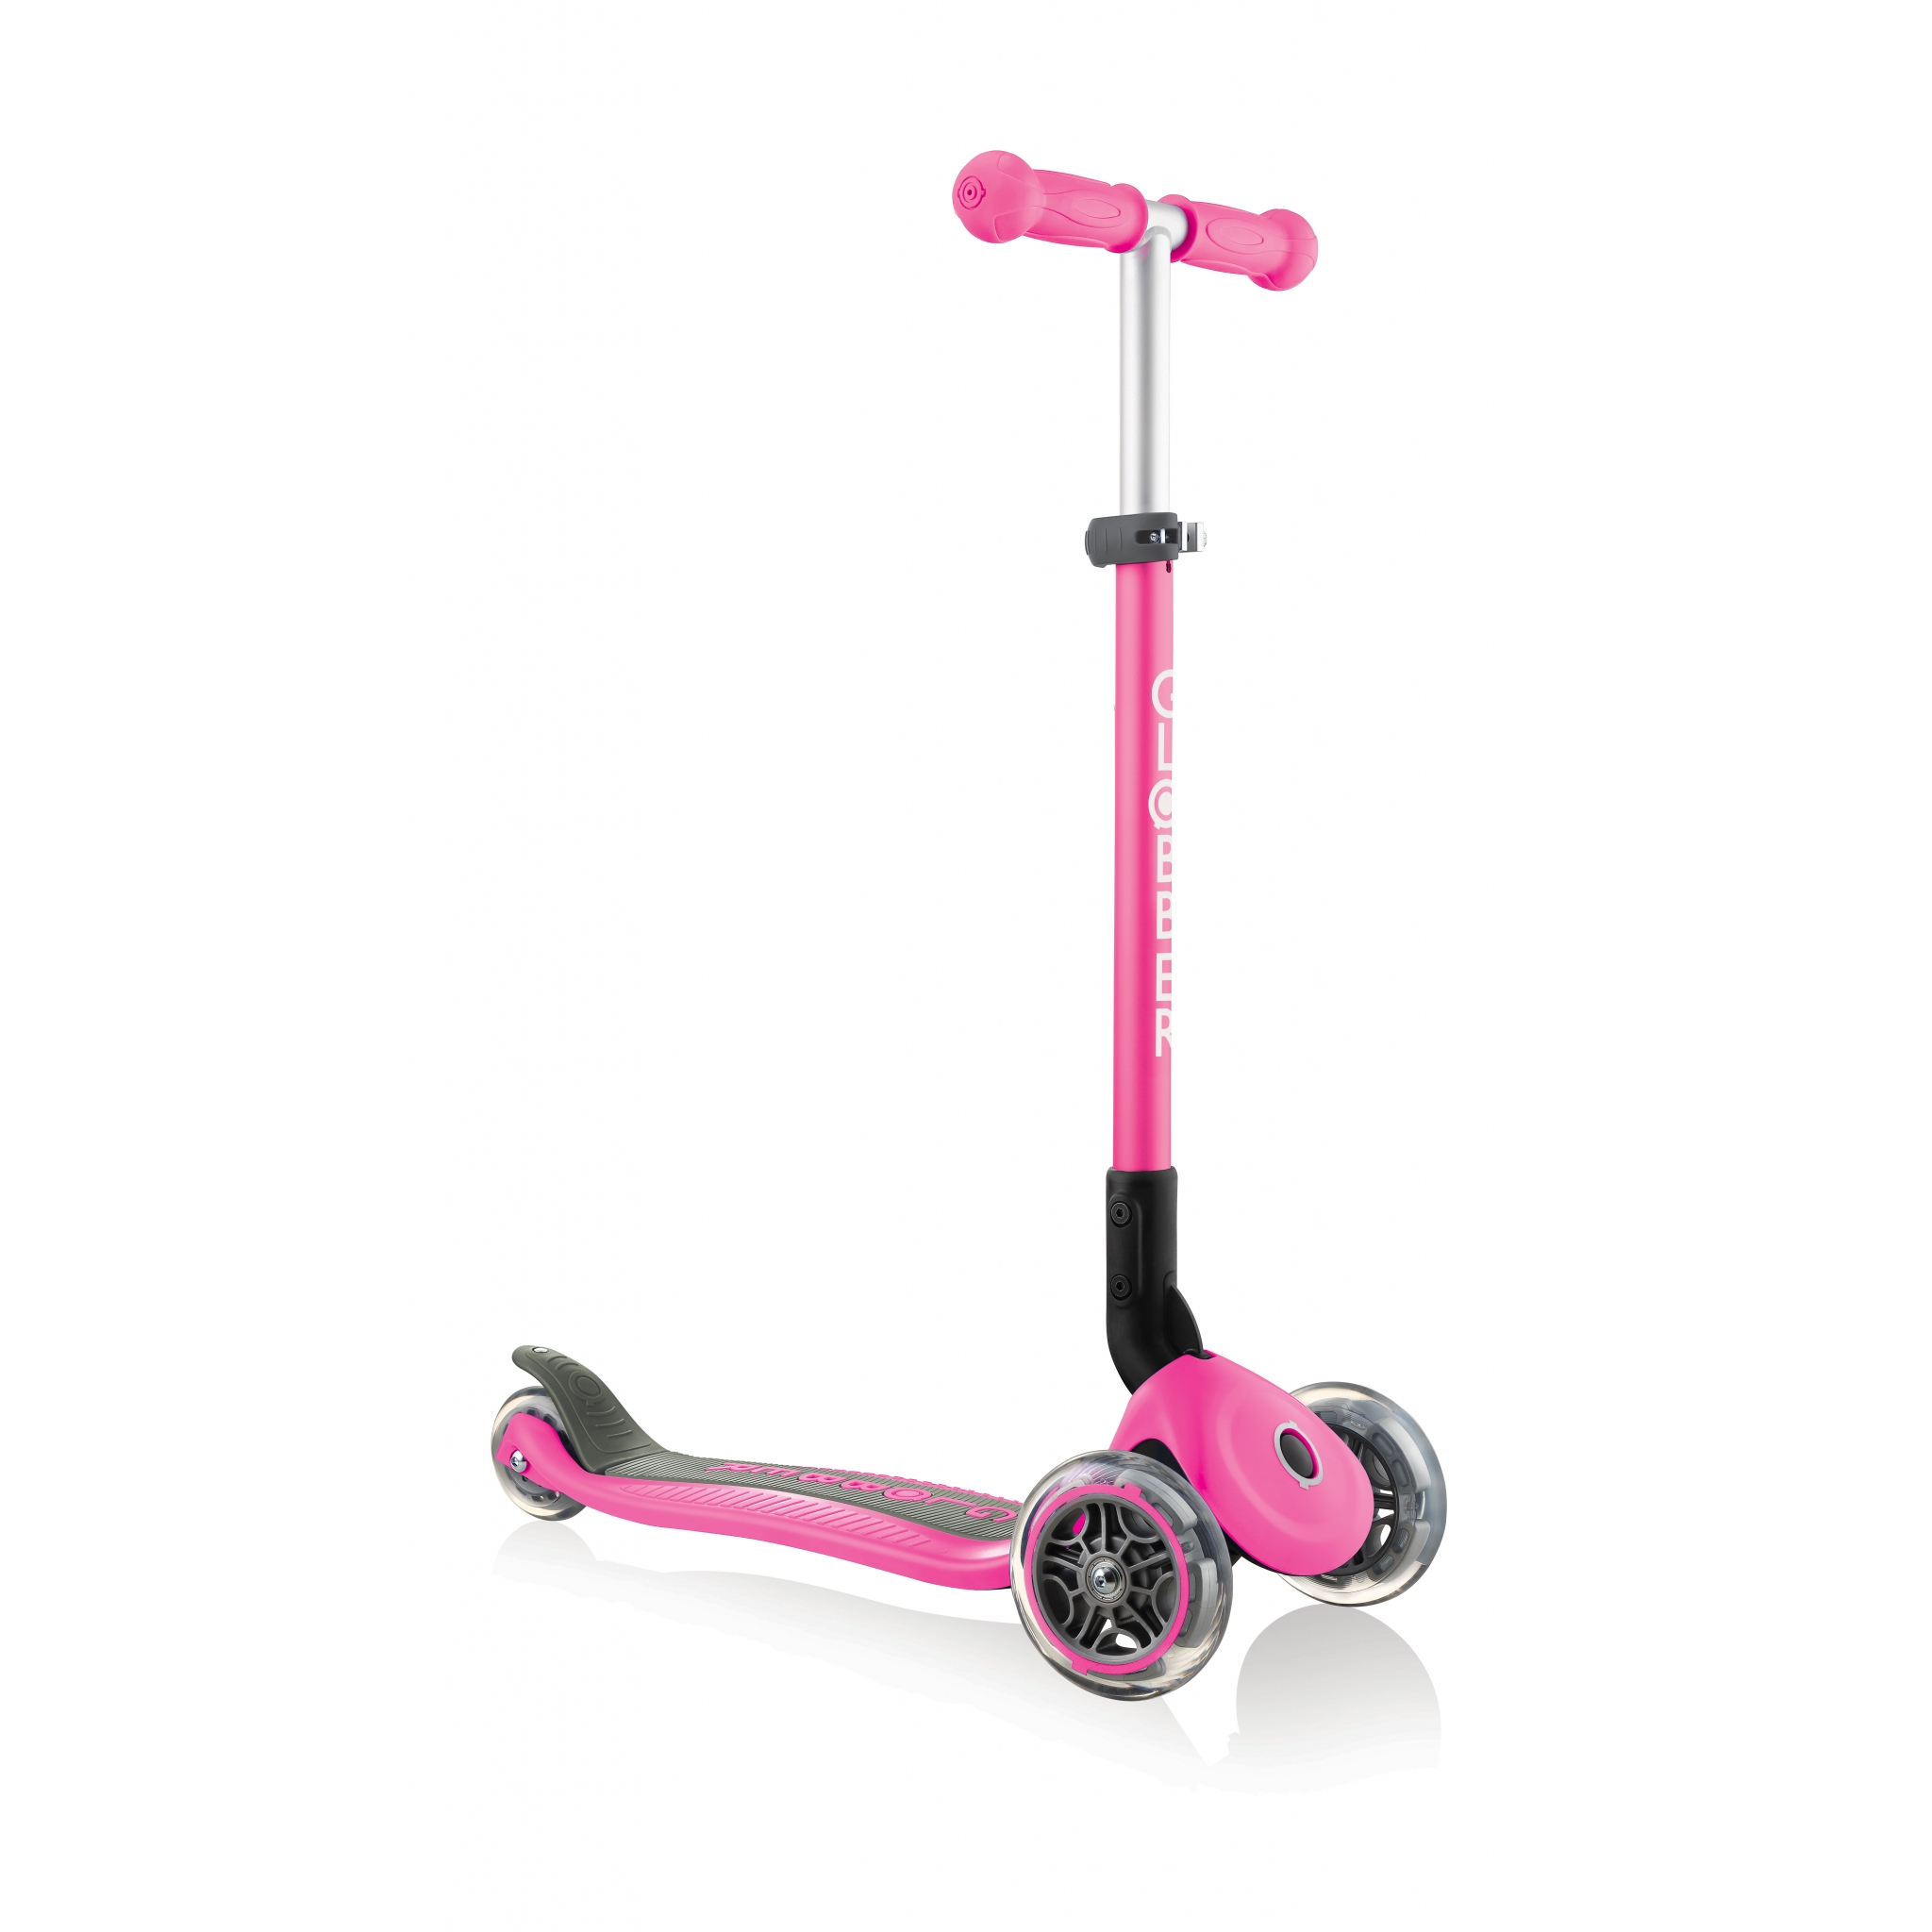 PRIMO-FOLDABLE-3-wheel-foldable-scooter-for-kids-neon-pink 2